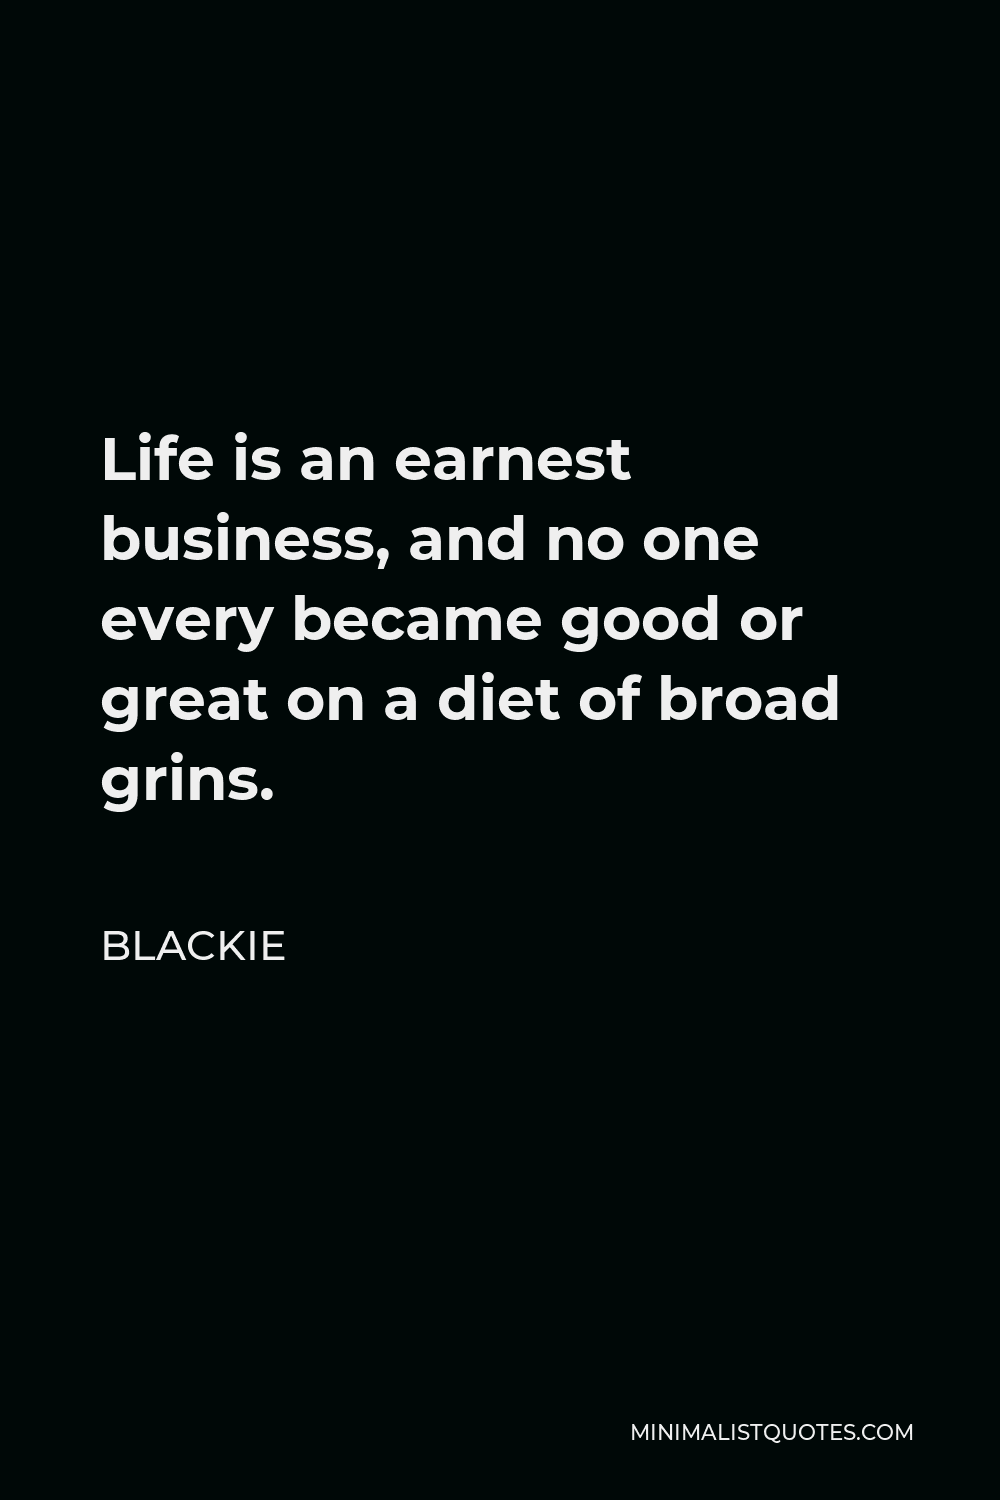 Blackie Quote - Life is an earnest business, and no one every became good or great on a diet of broad grins.